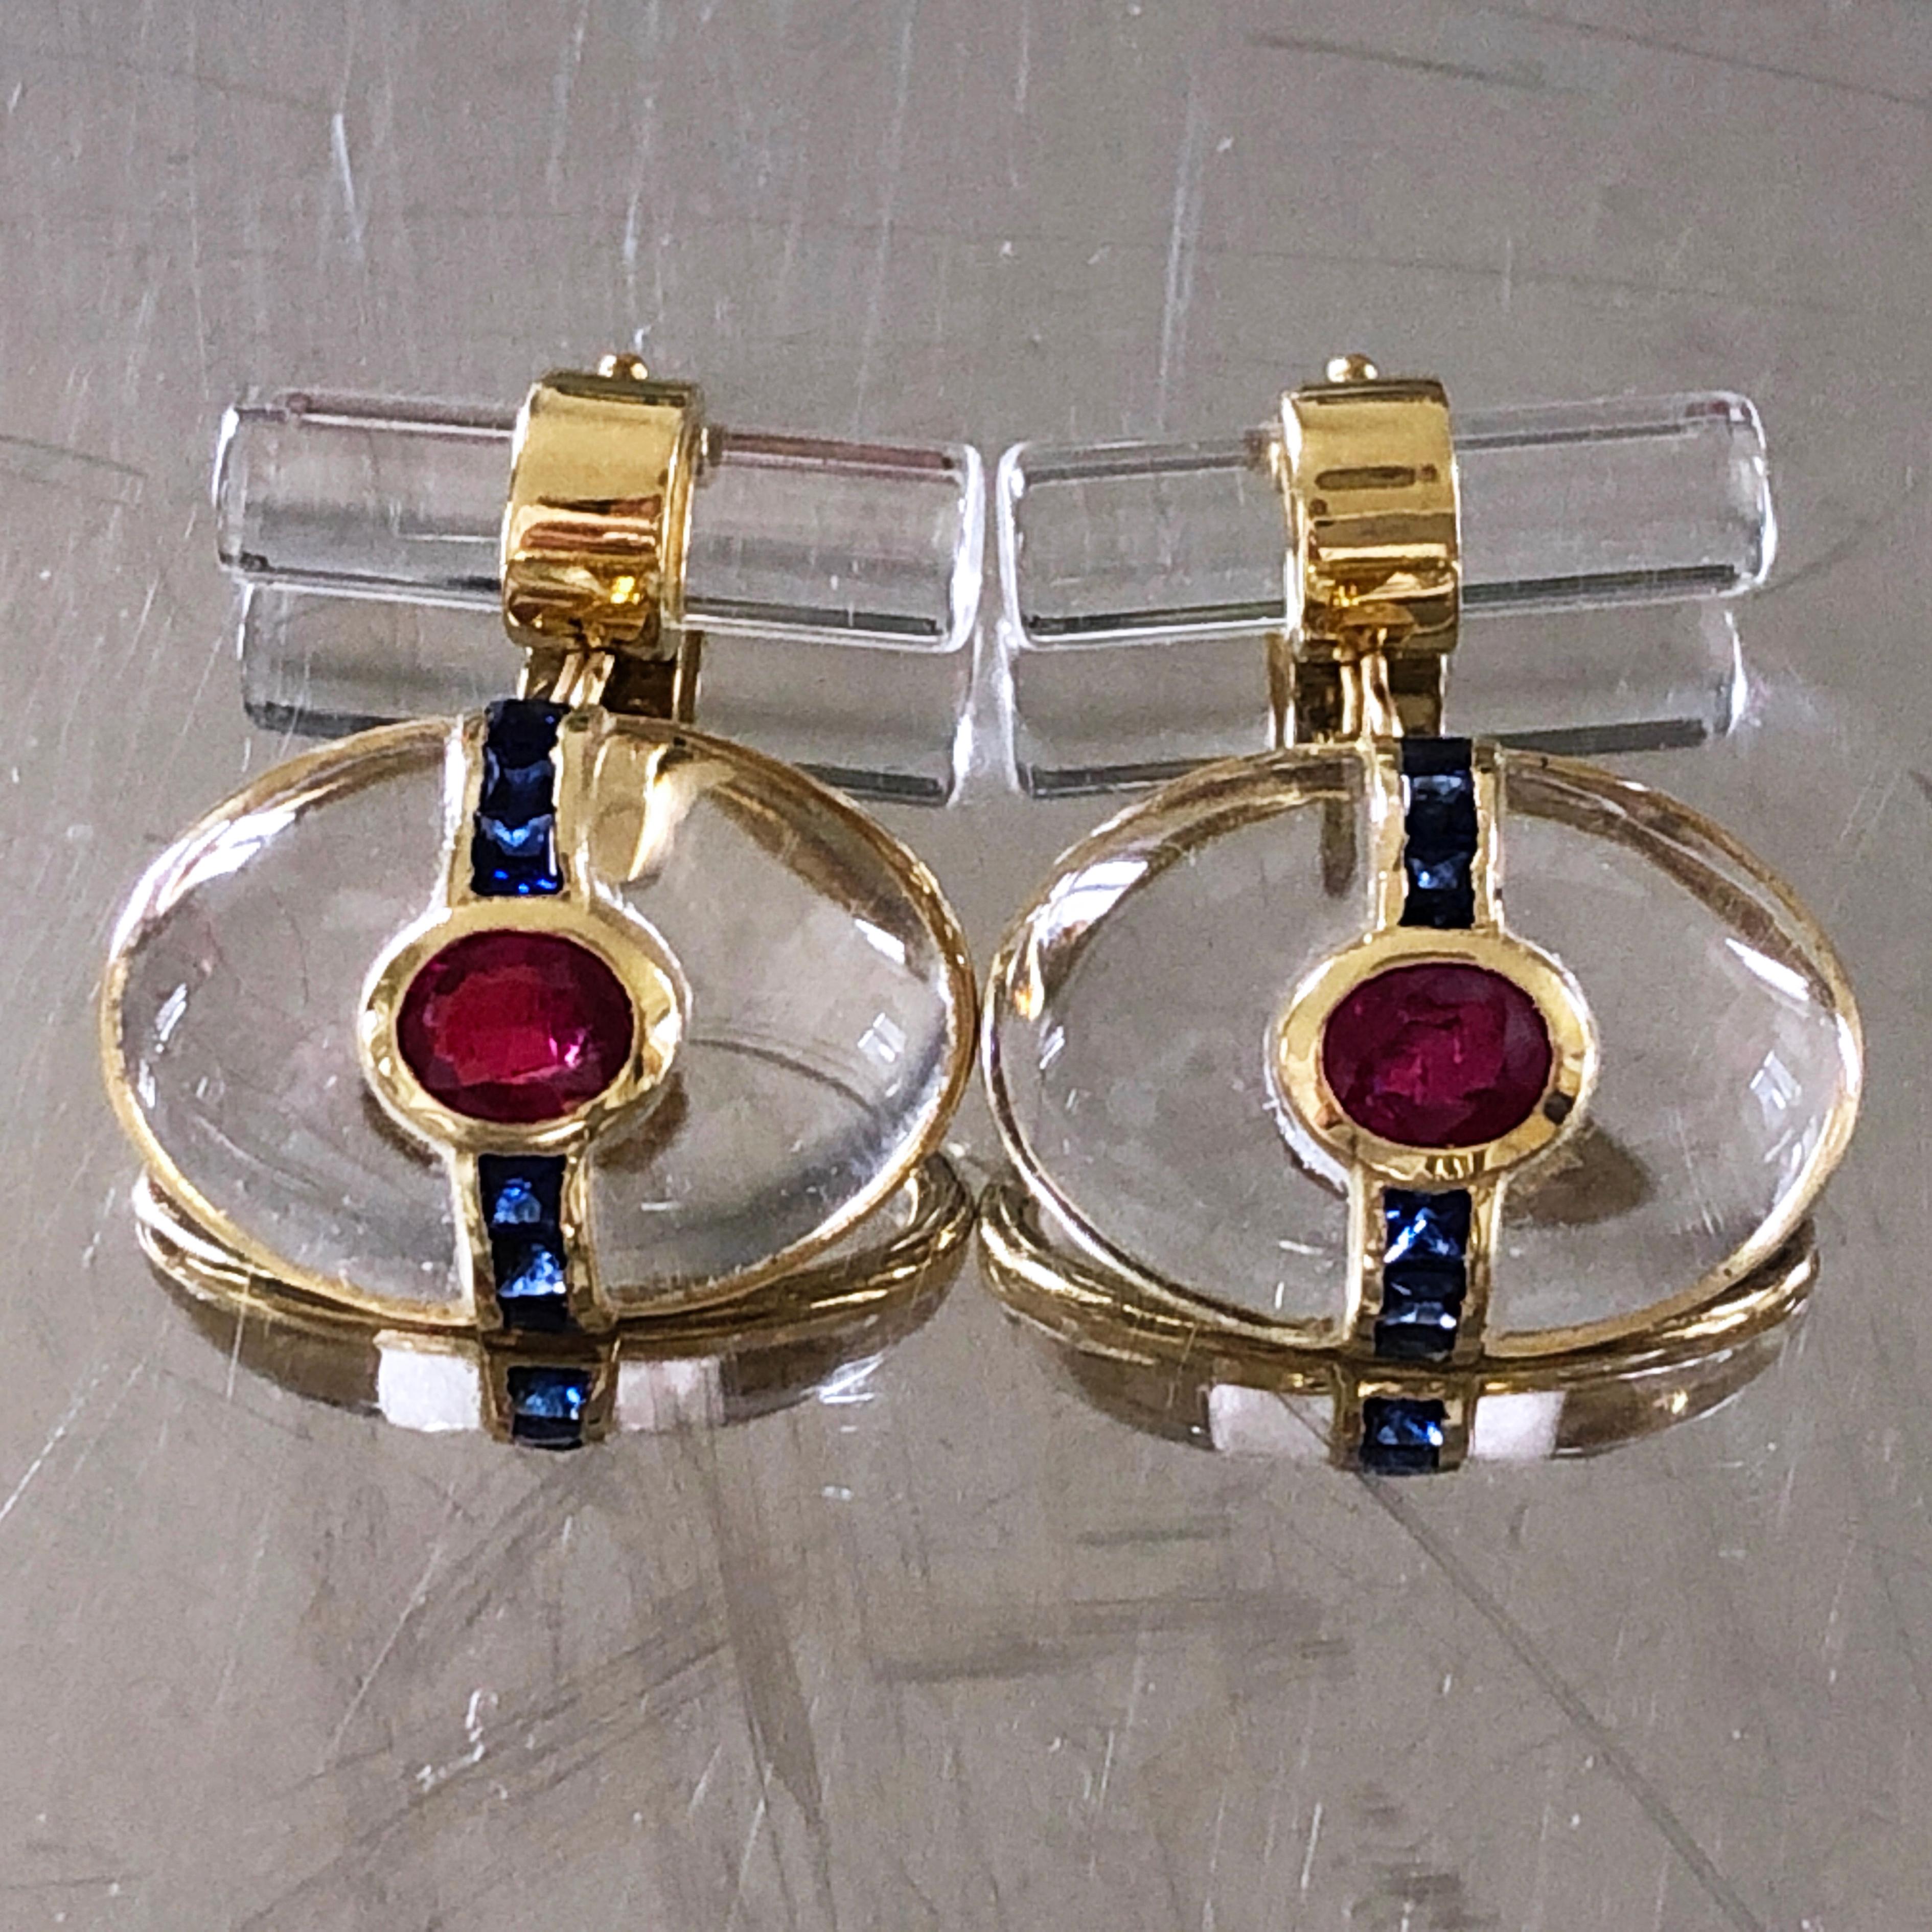 One-of-a-kind absolutely Chic yet Timeless pair of Cufflinks featuring an Oval Hand Inlaid Rock Crystal Cabochon embracing a Natural Oval Ruby and an almost 1 Carat Blue Sapphire Calibré Cut Line in an 18K yellow Gold Setting. 
A Rock Crystal Stick